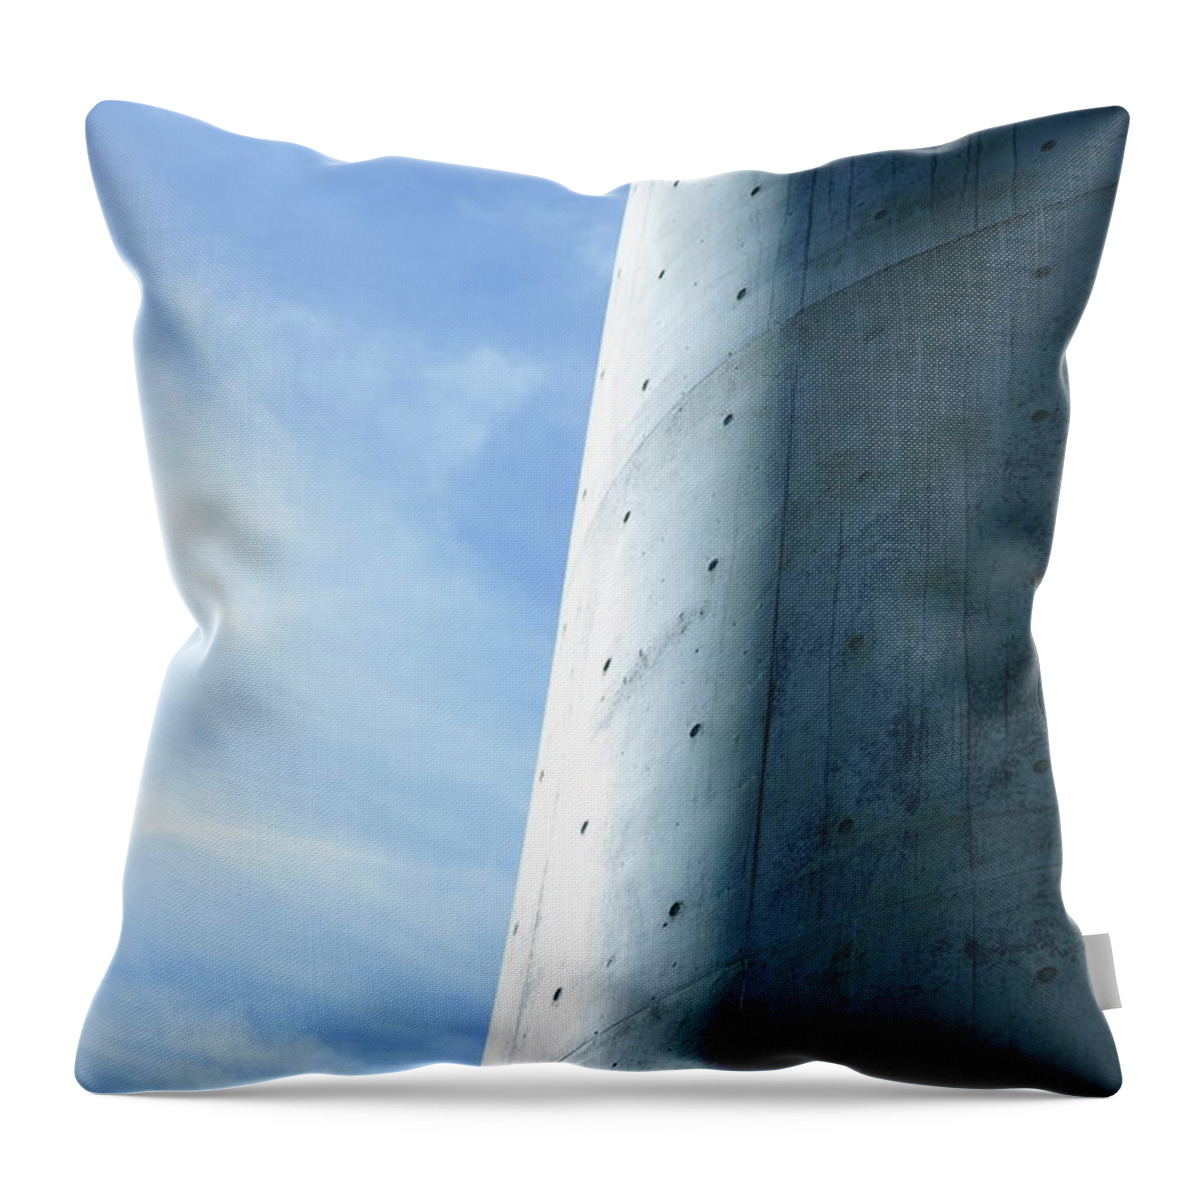 Built Structure Throw Pillow featuring the photograph Supporting Beam Of Highway,low Angle by Sot